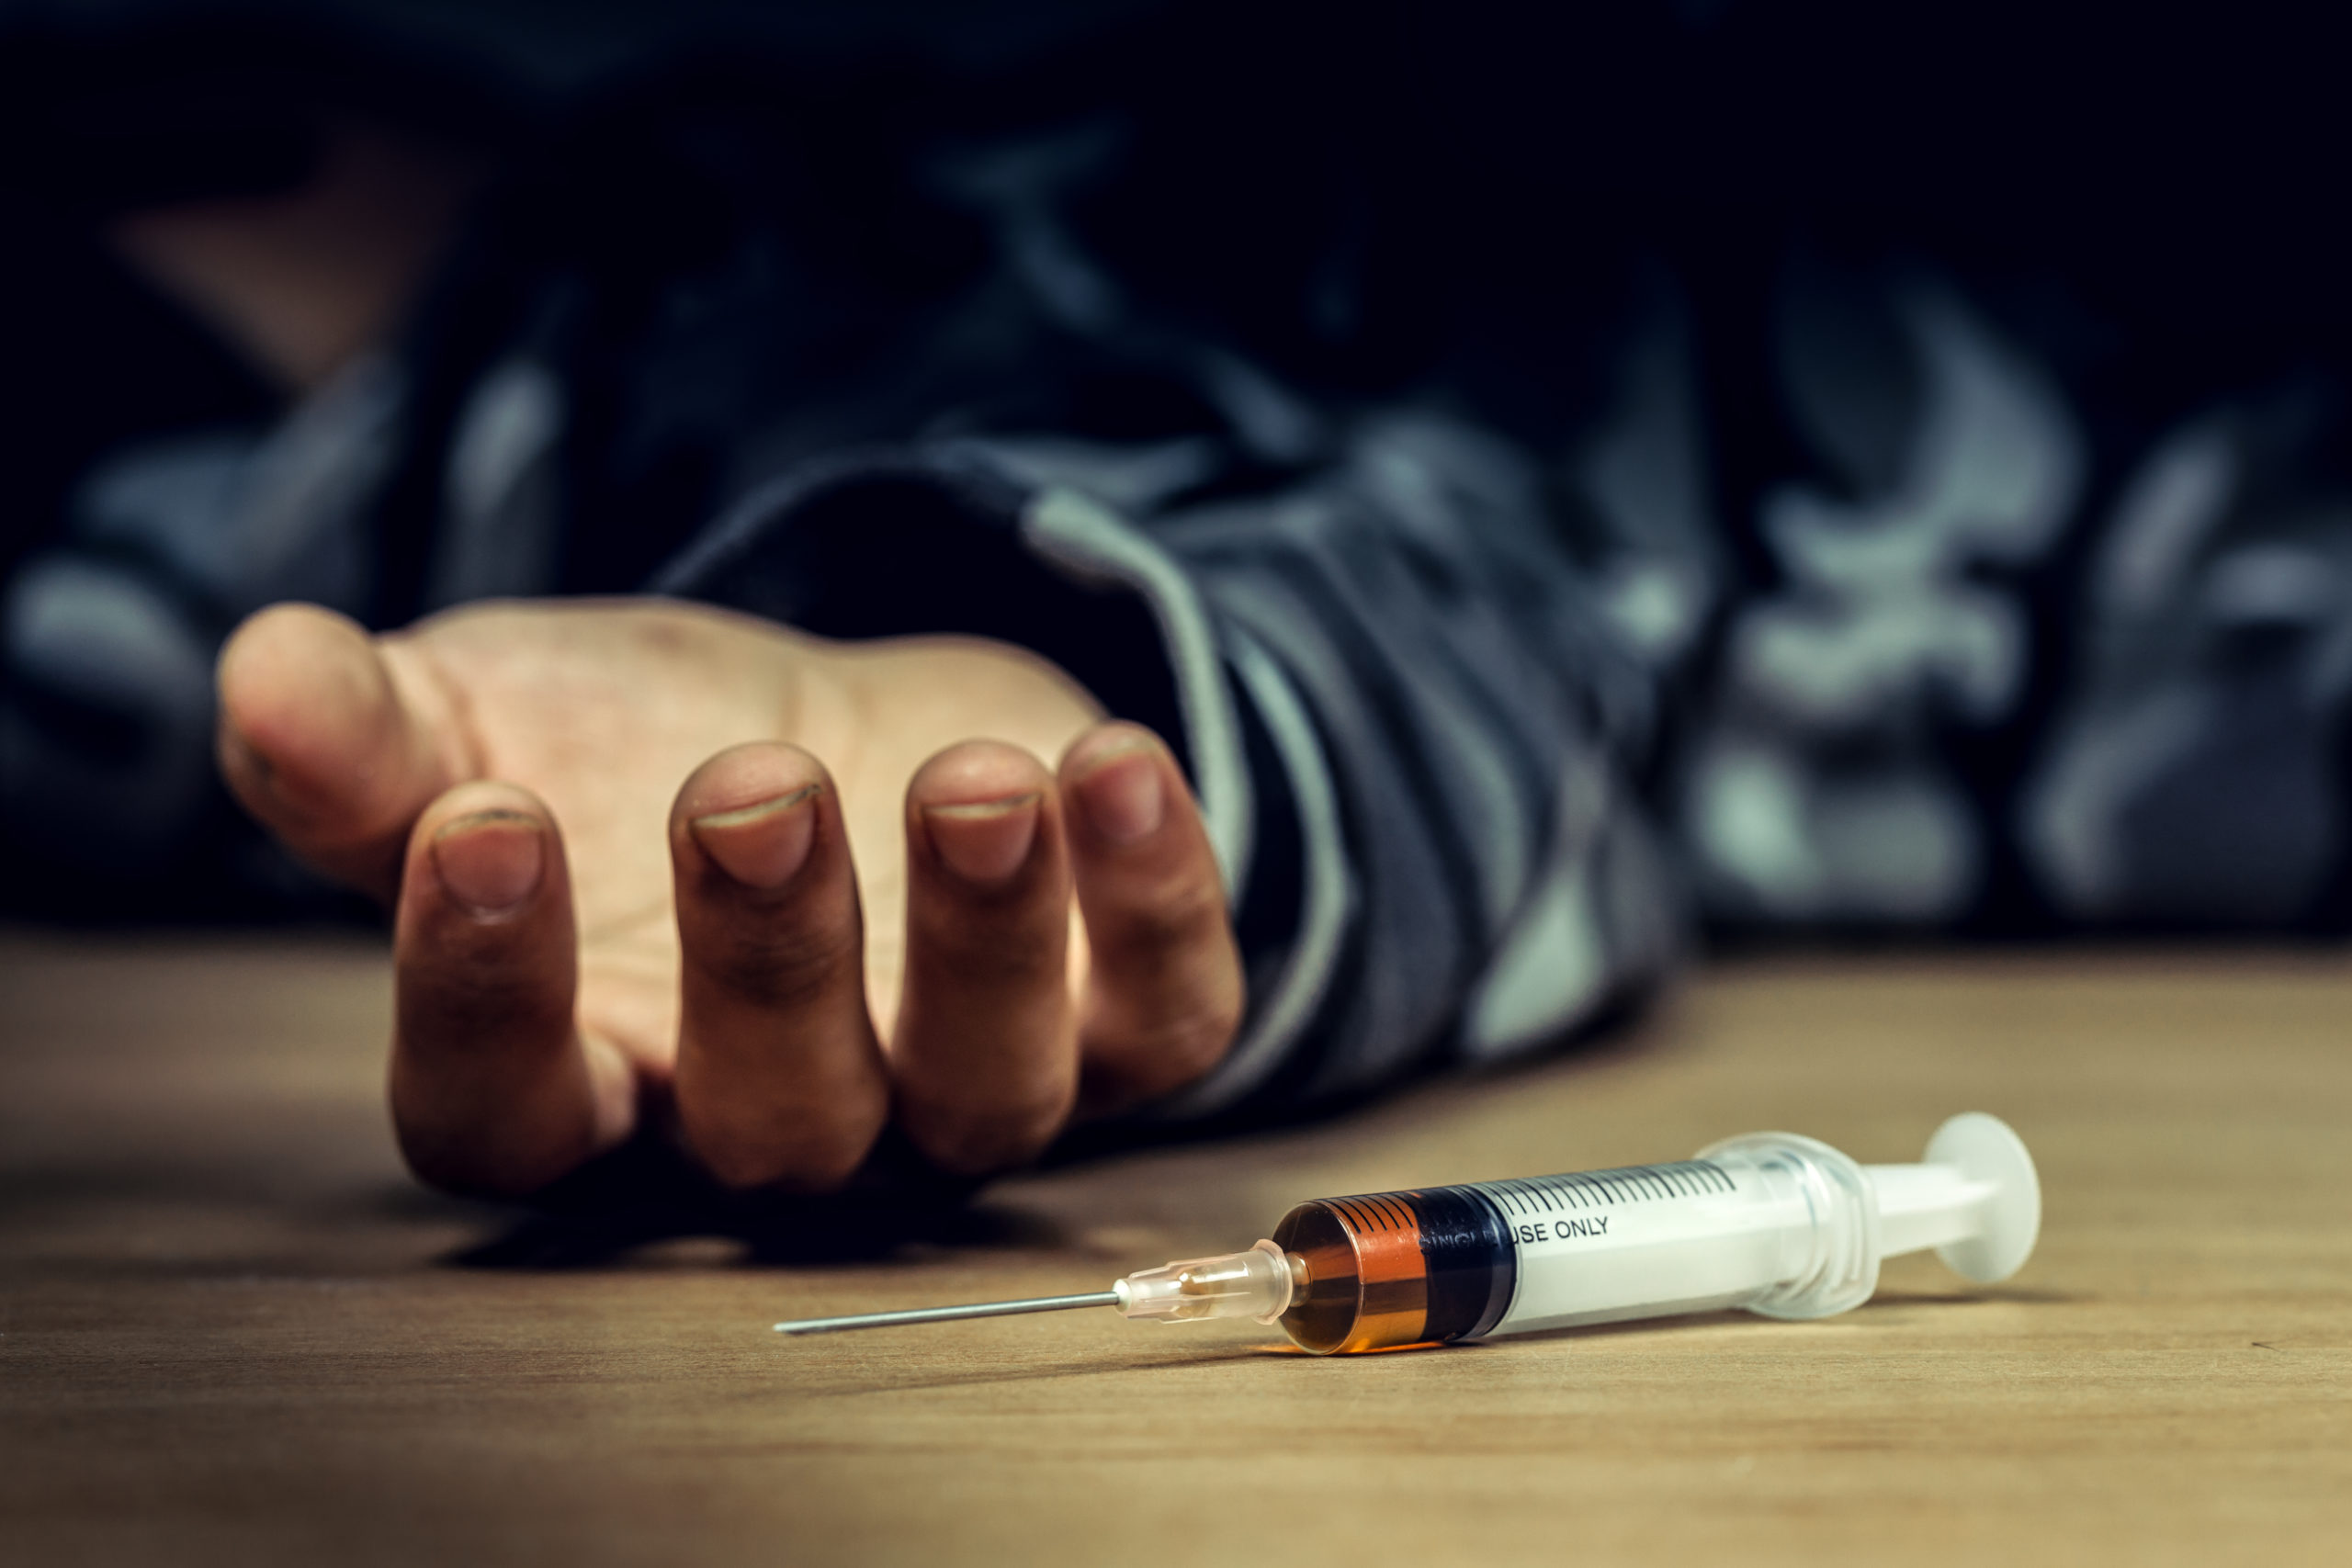 a syringe lying next to a dead man's outstretched hand